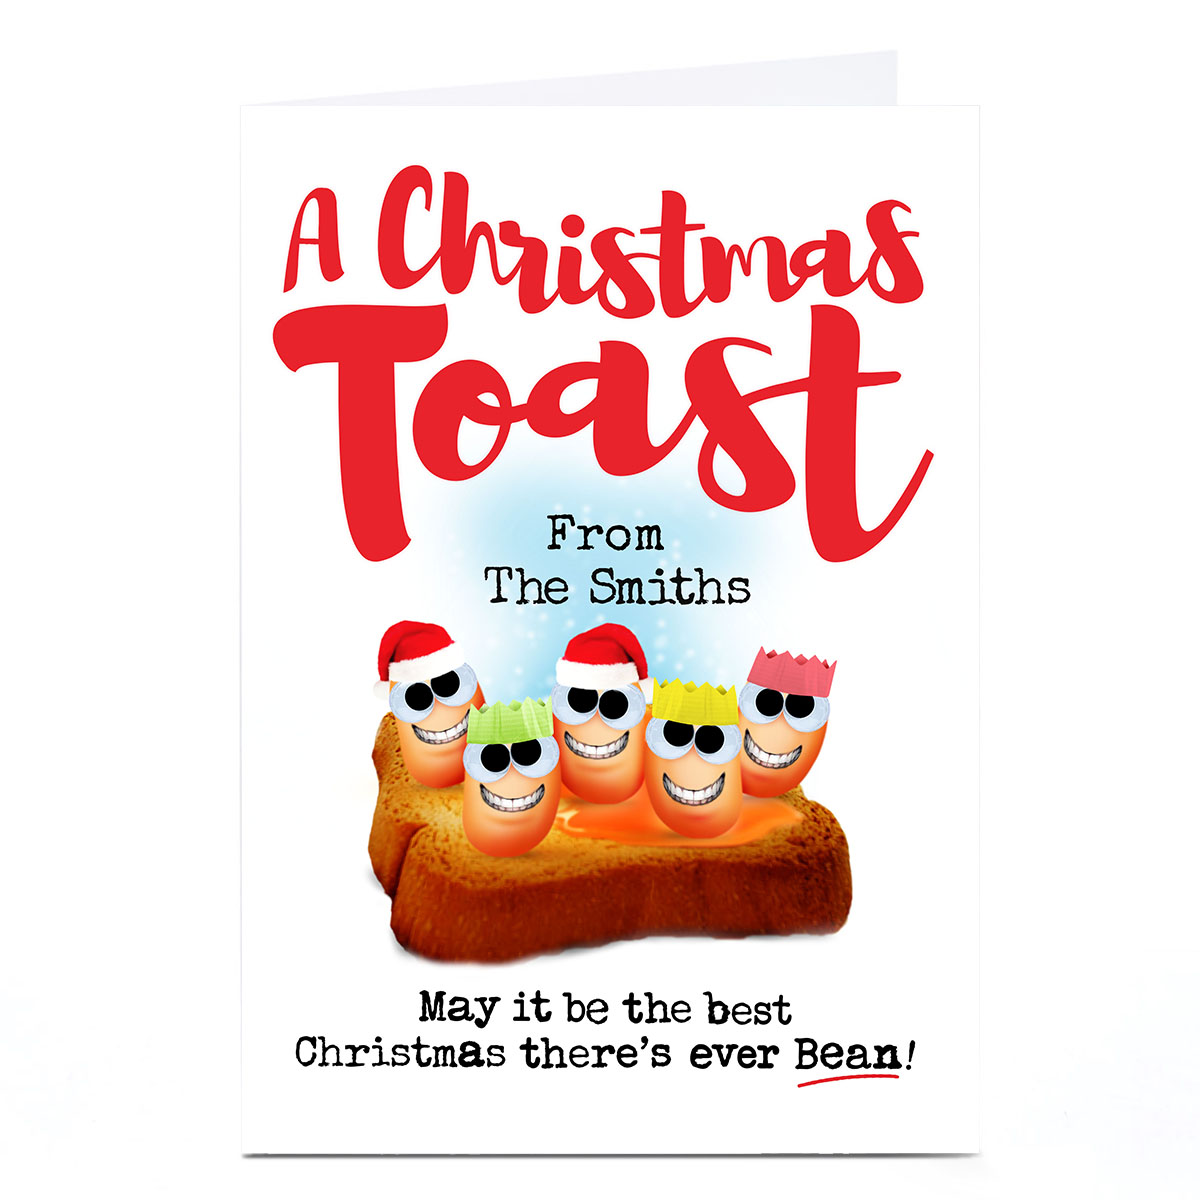 Personalised PG Quips Christmas Card - A Christmas Toast